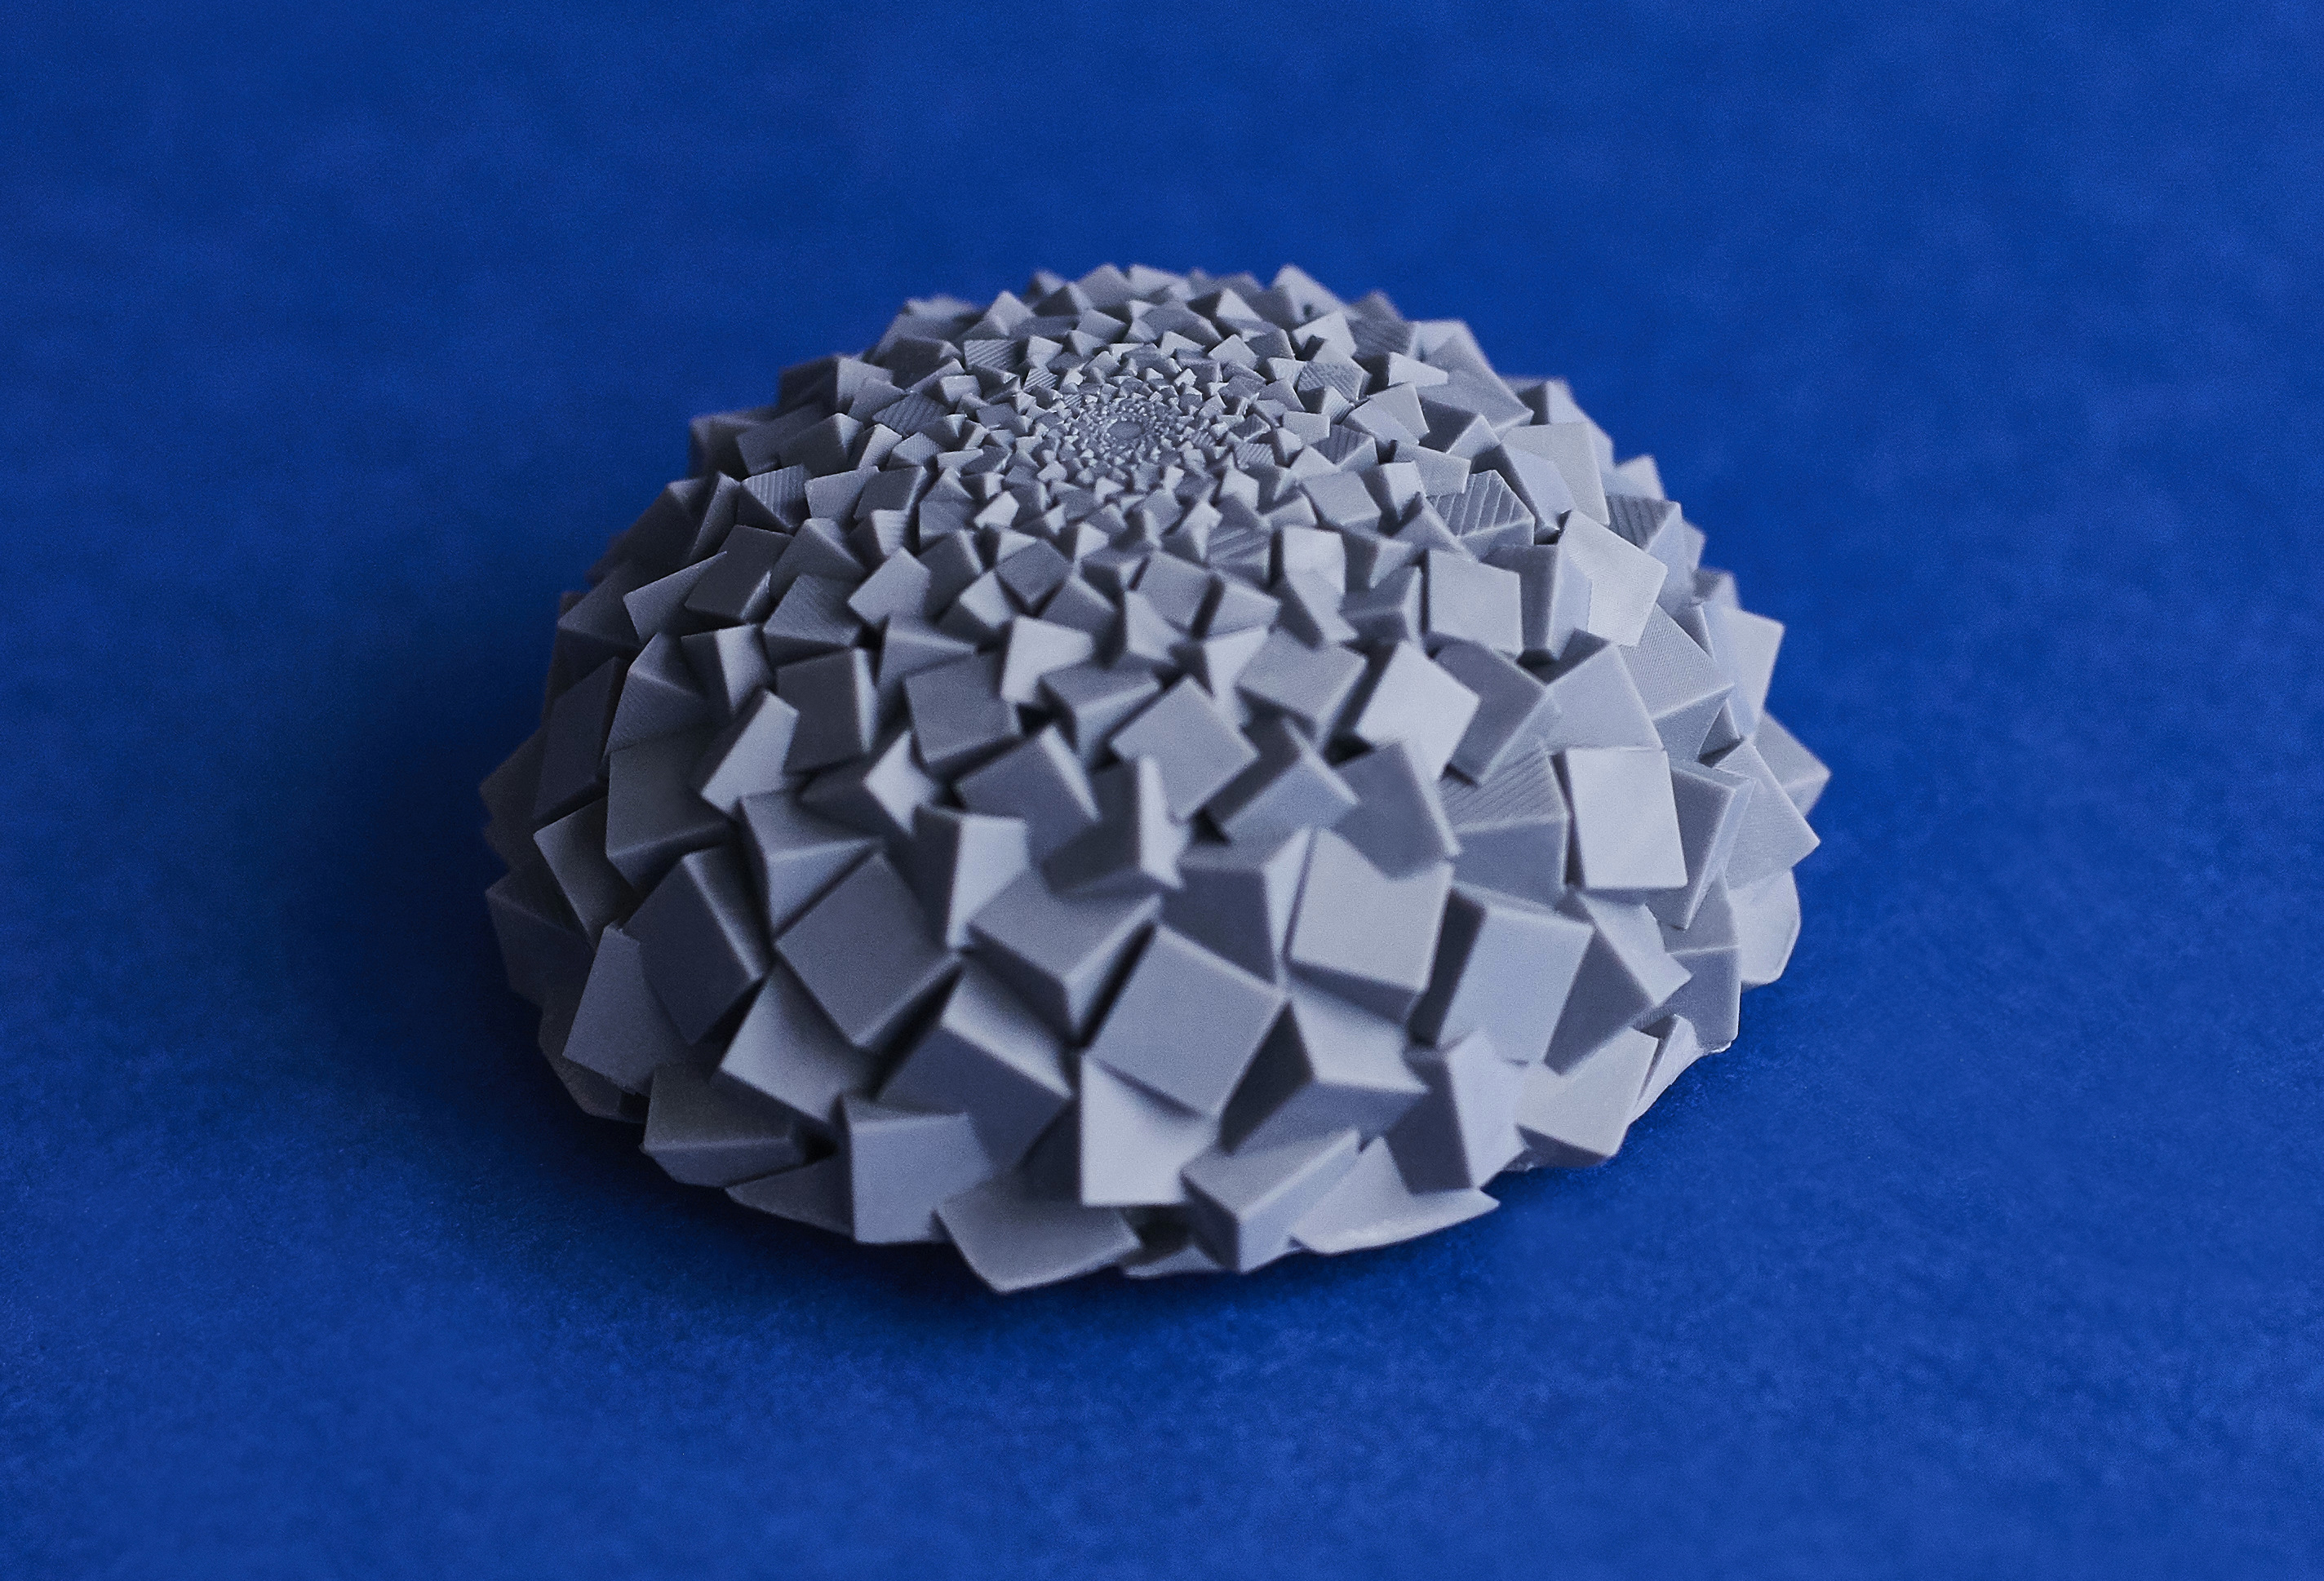 3D Printing with Prototyping Acrylate: the complete Q&A